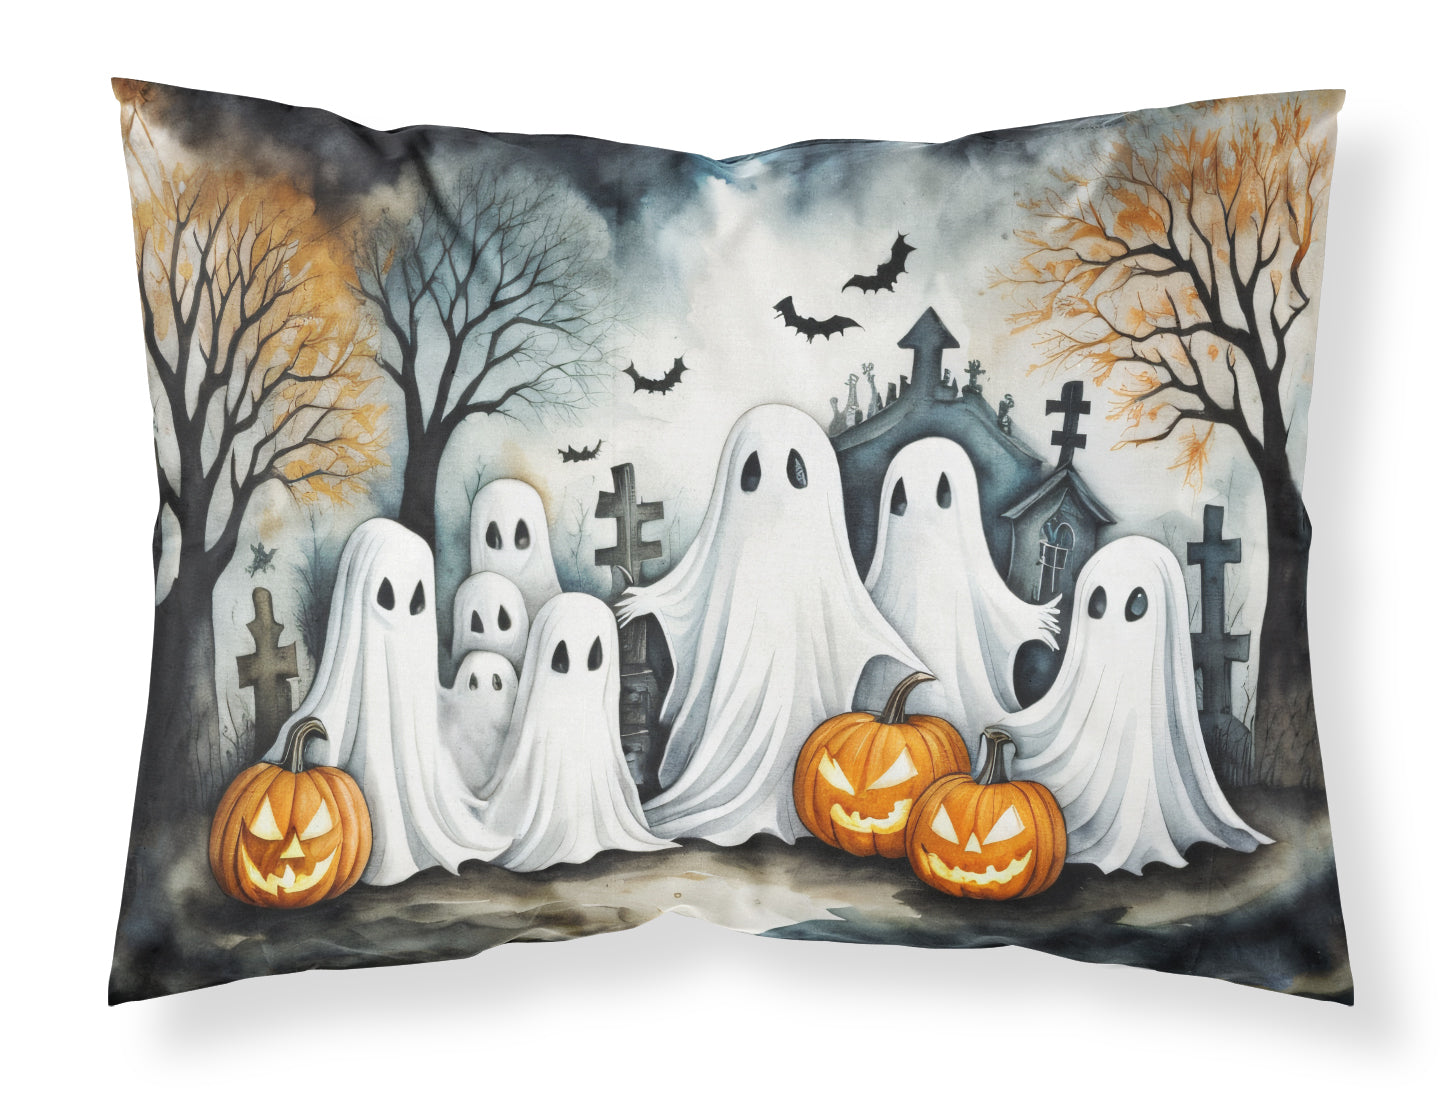 Buy this Ghosts Spooky Halloween Fabric Standard Pillowcase